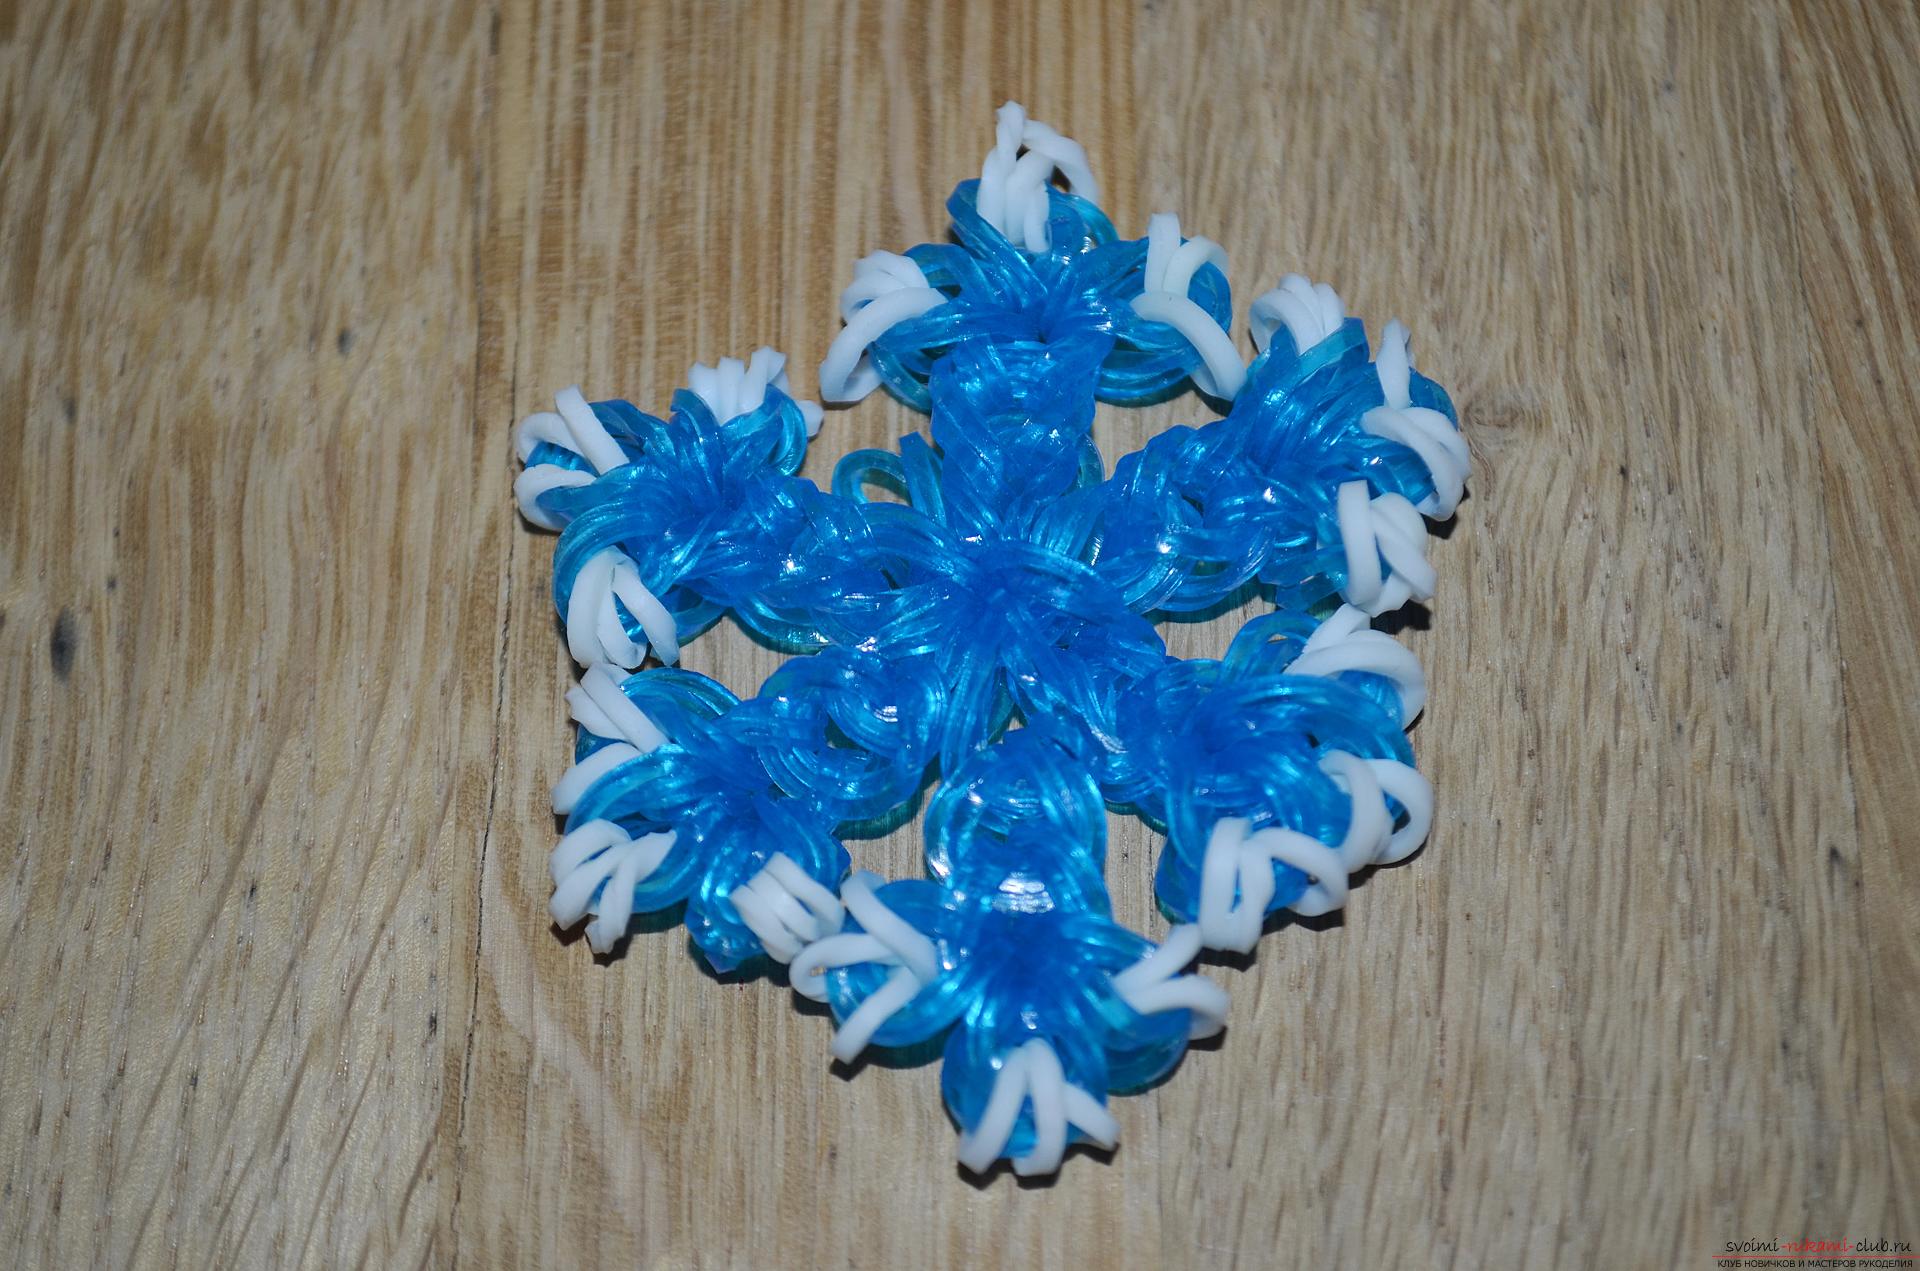 Photo for a lesson on weaving snowflakes from rubber bands. Photo Number 22